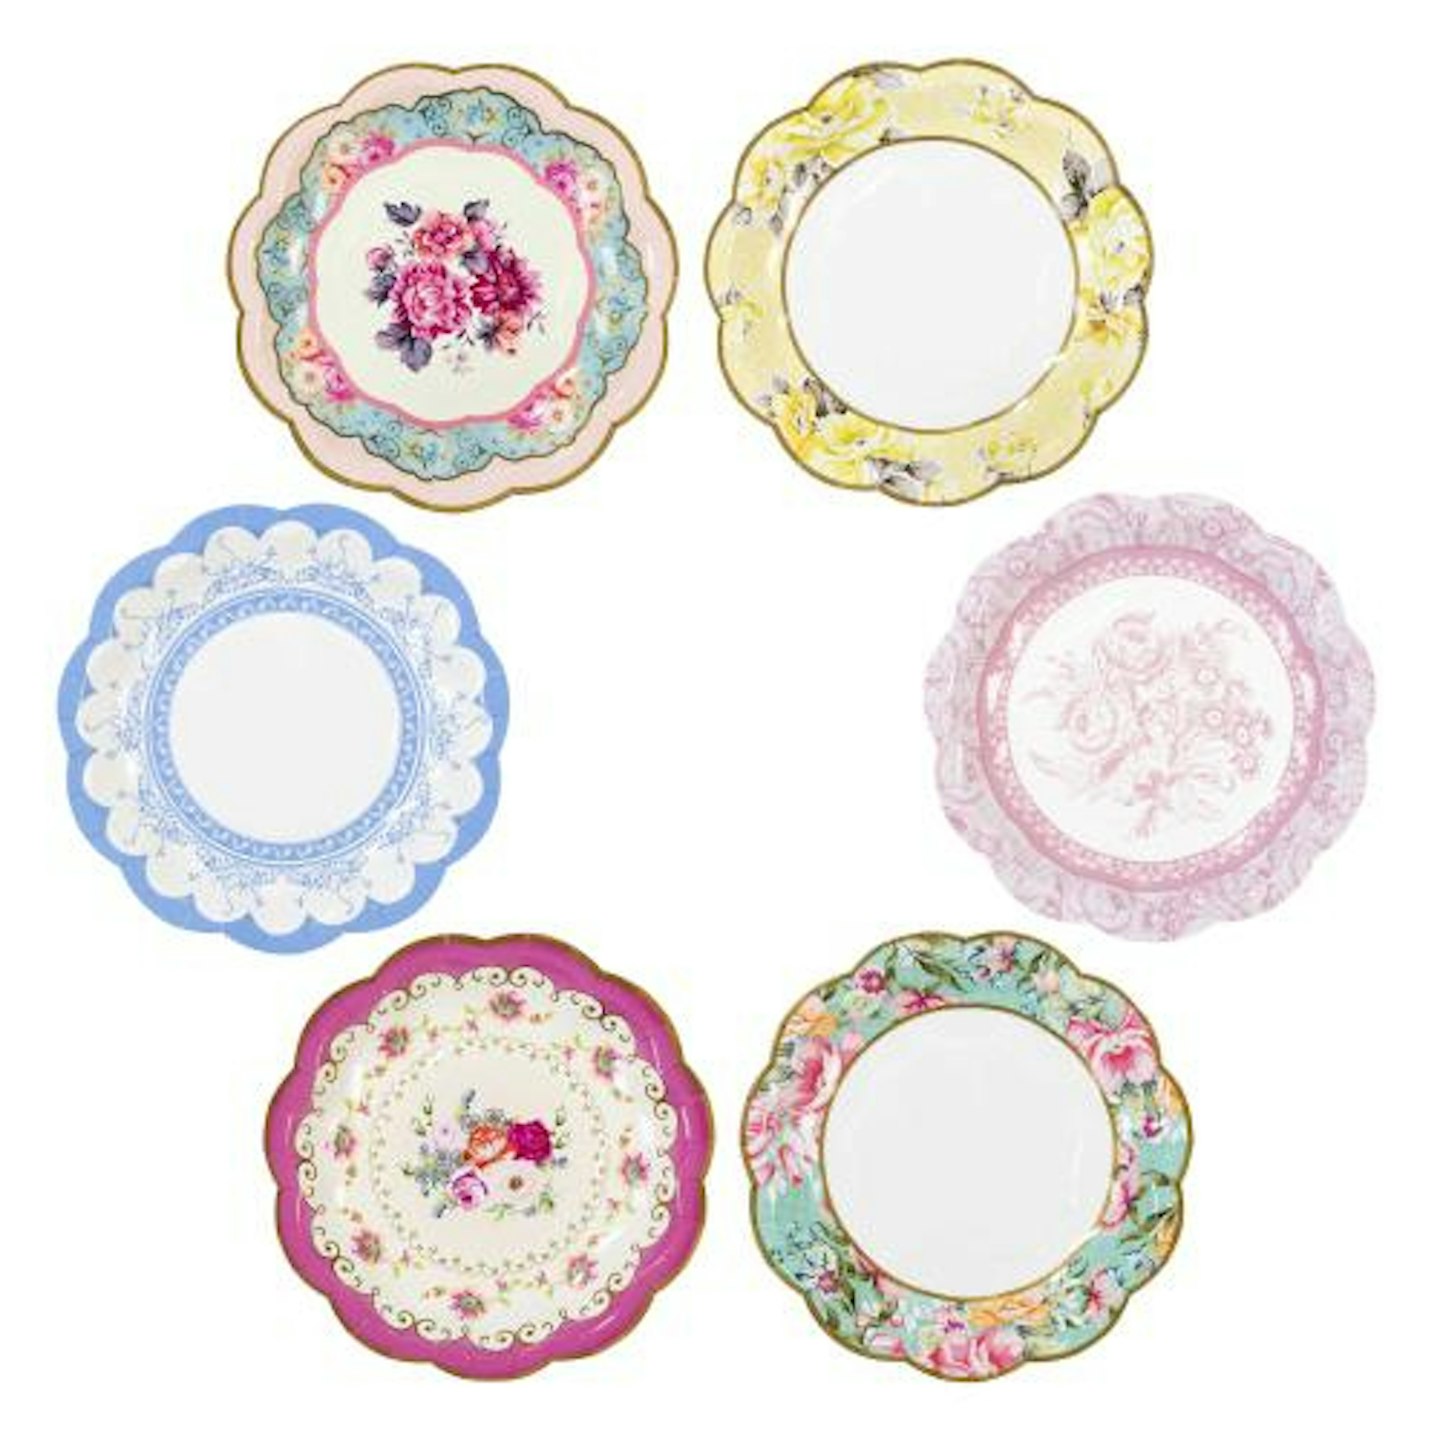 Party Decorations, Vintage Style plates,  £2.99 for a 12pack